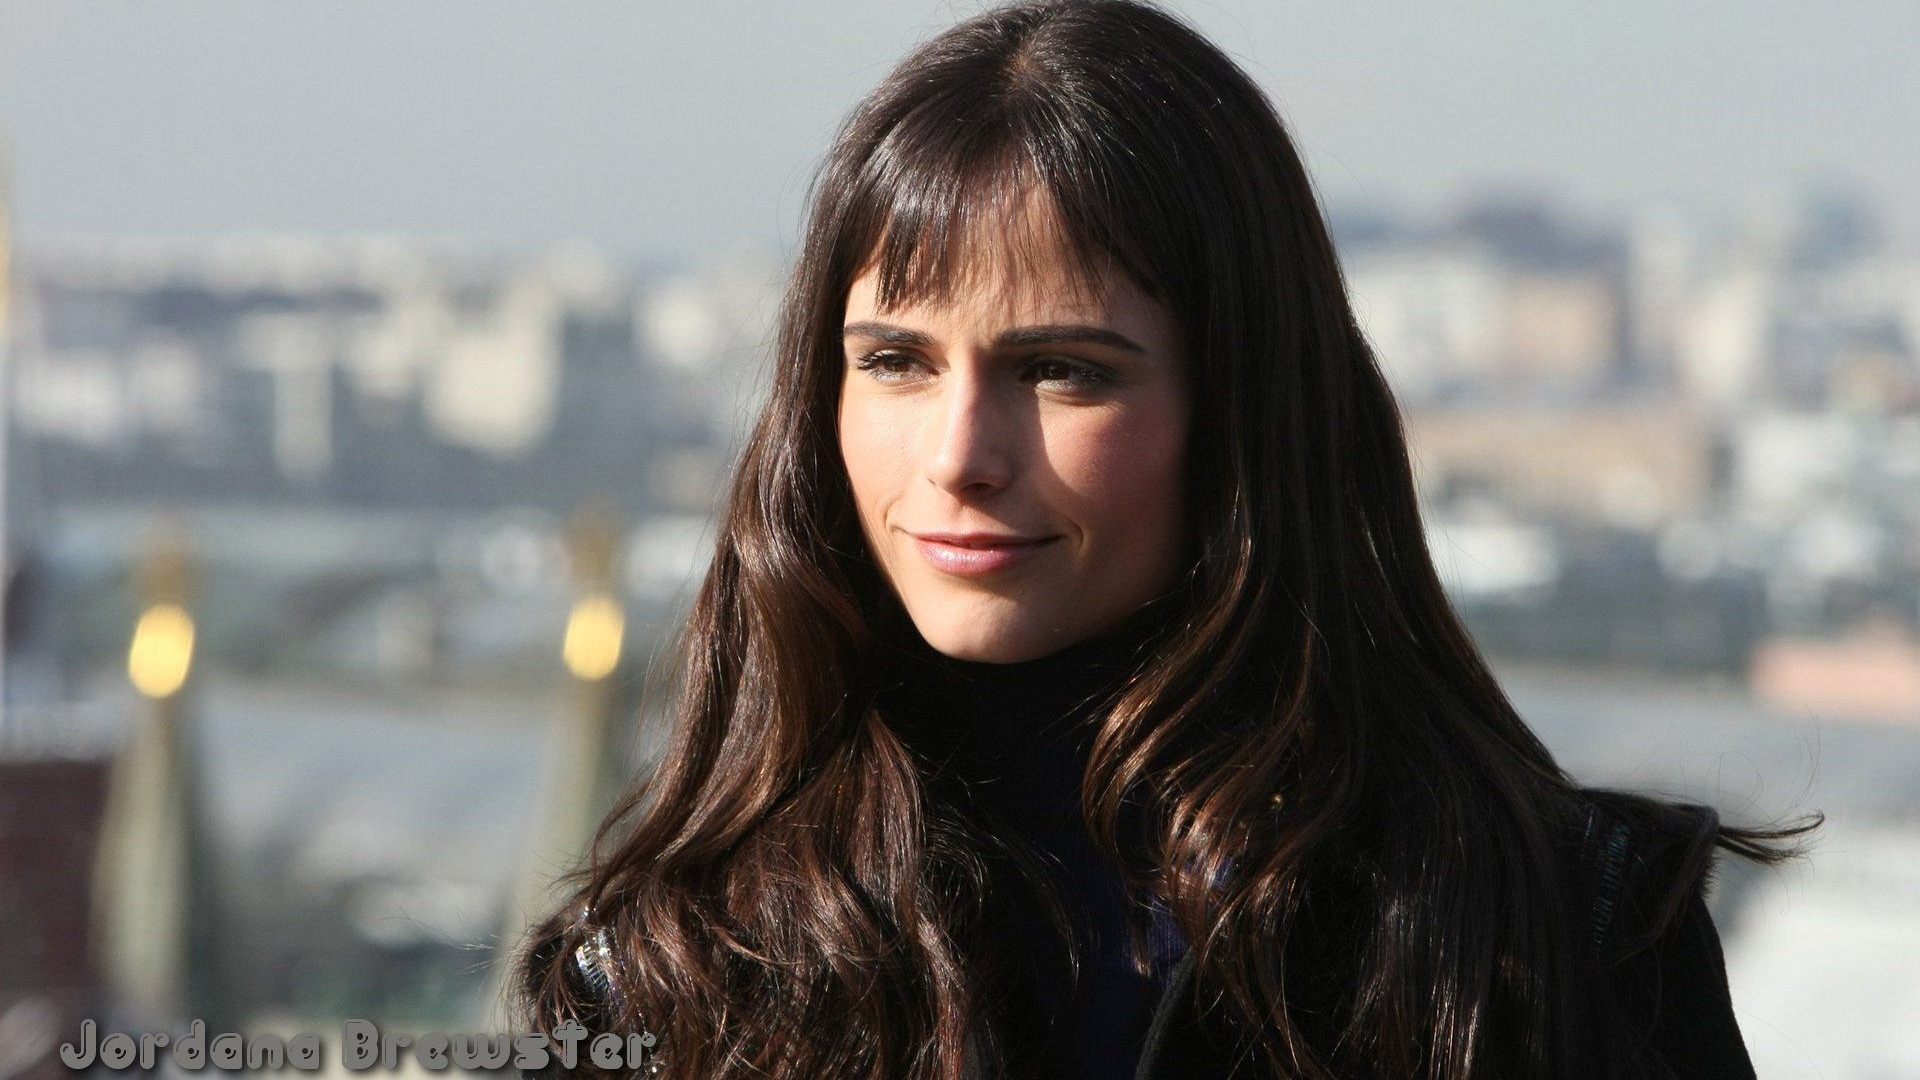 Jordana Brewster #018 - 1920x1080 Wallpapers Pictures Photos Images